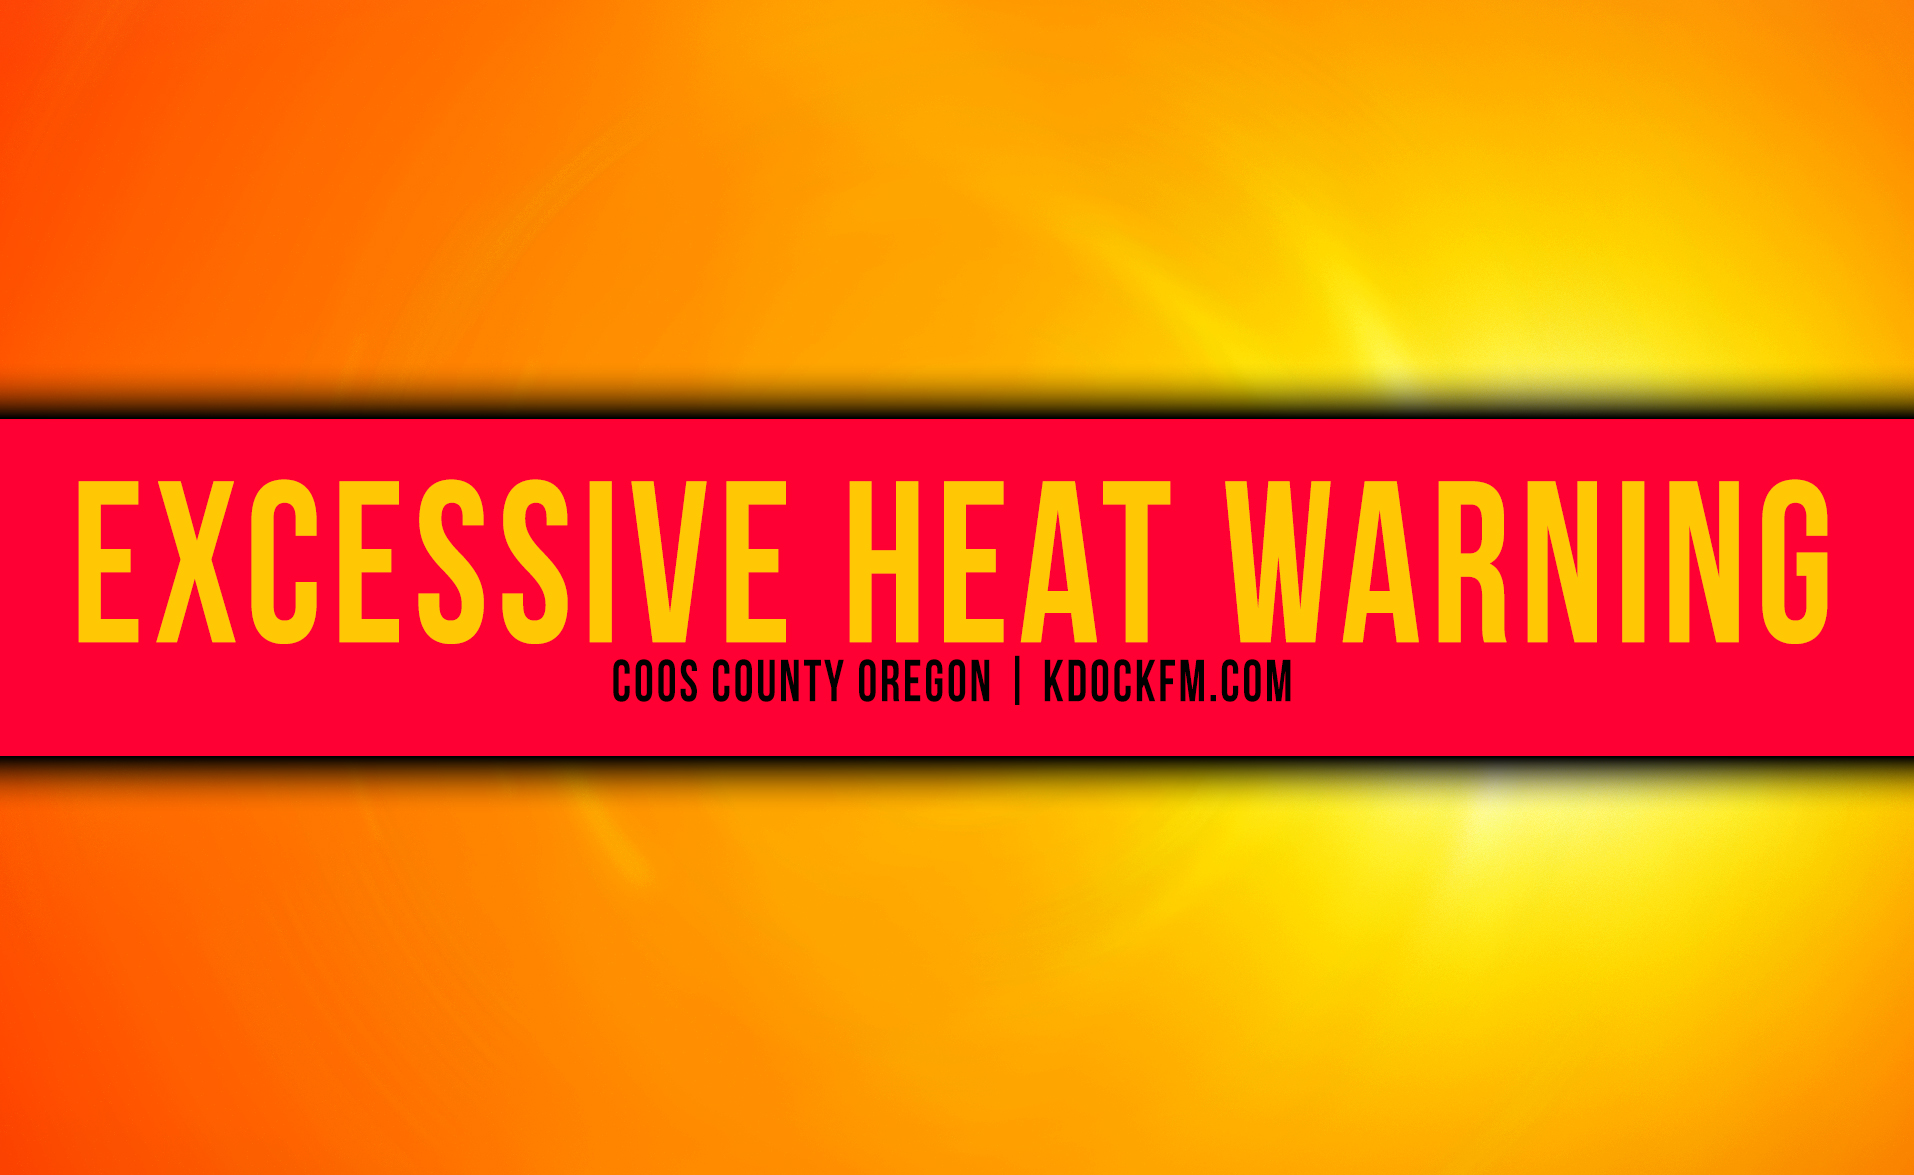 You are currently viewing EXCESSIVE HEAT WARNING